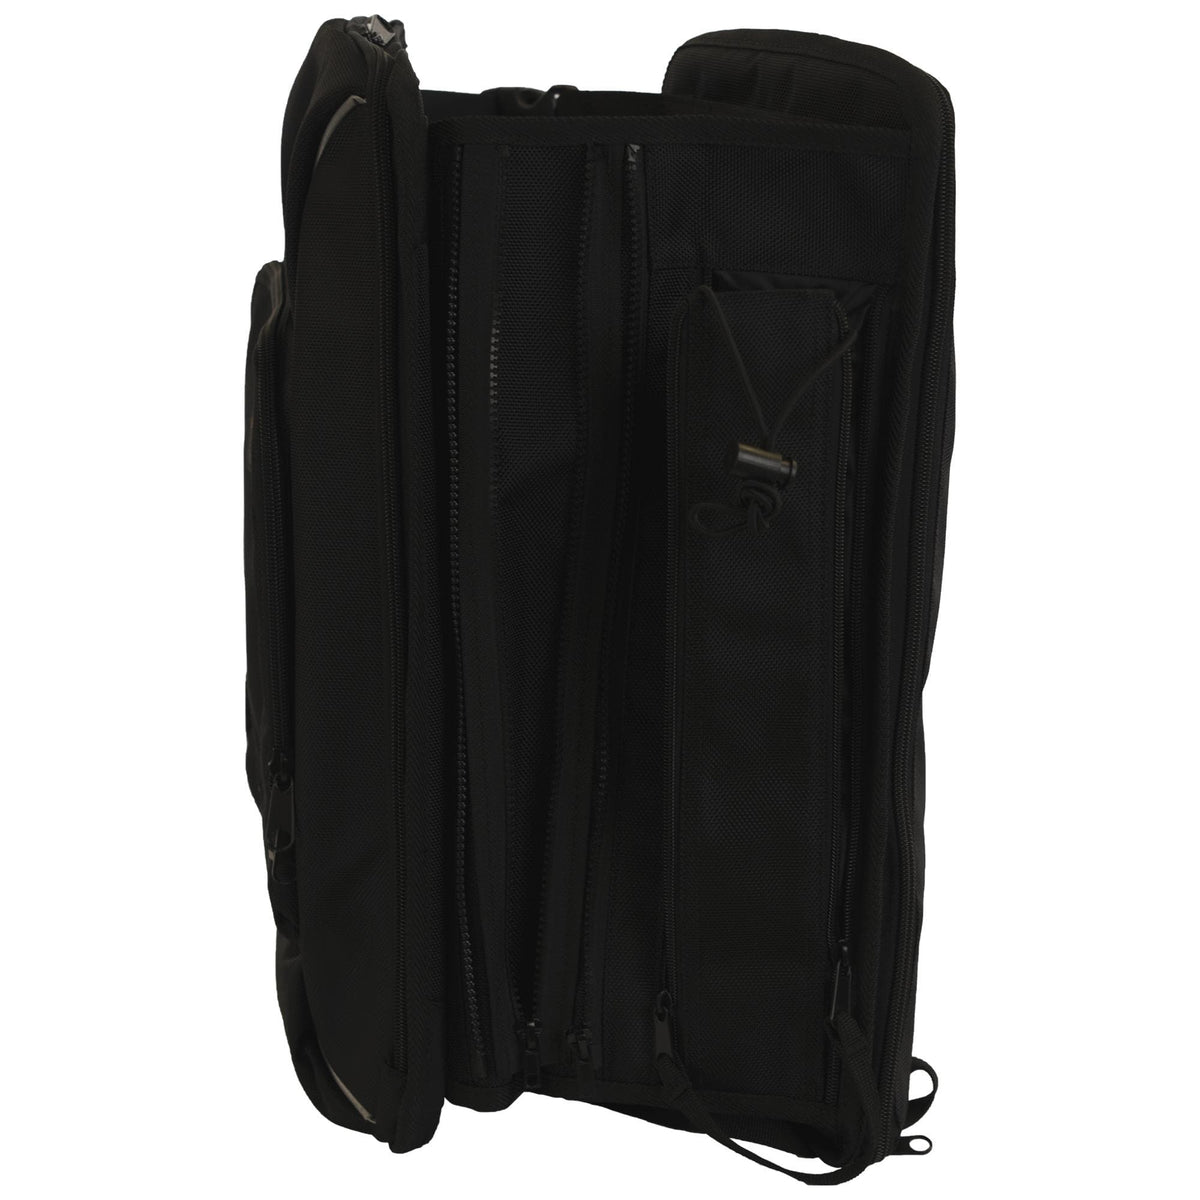 Joey Backpack for Violin, Viola, and Double Cases